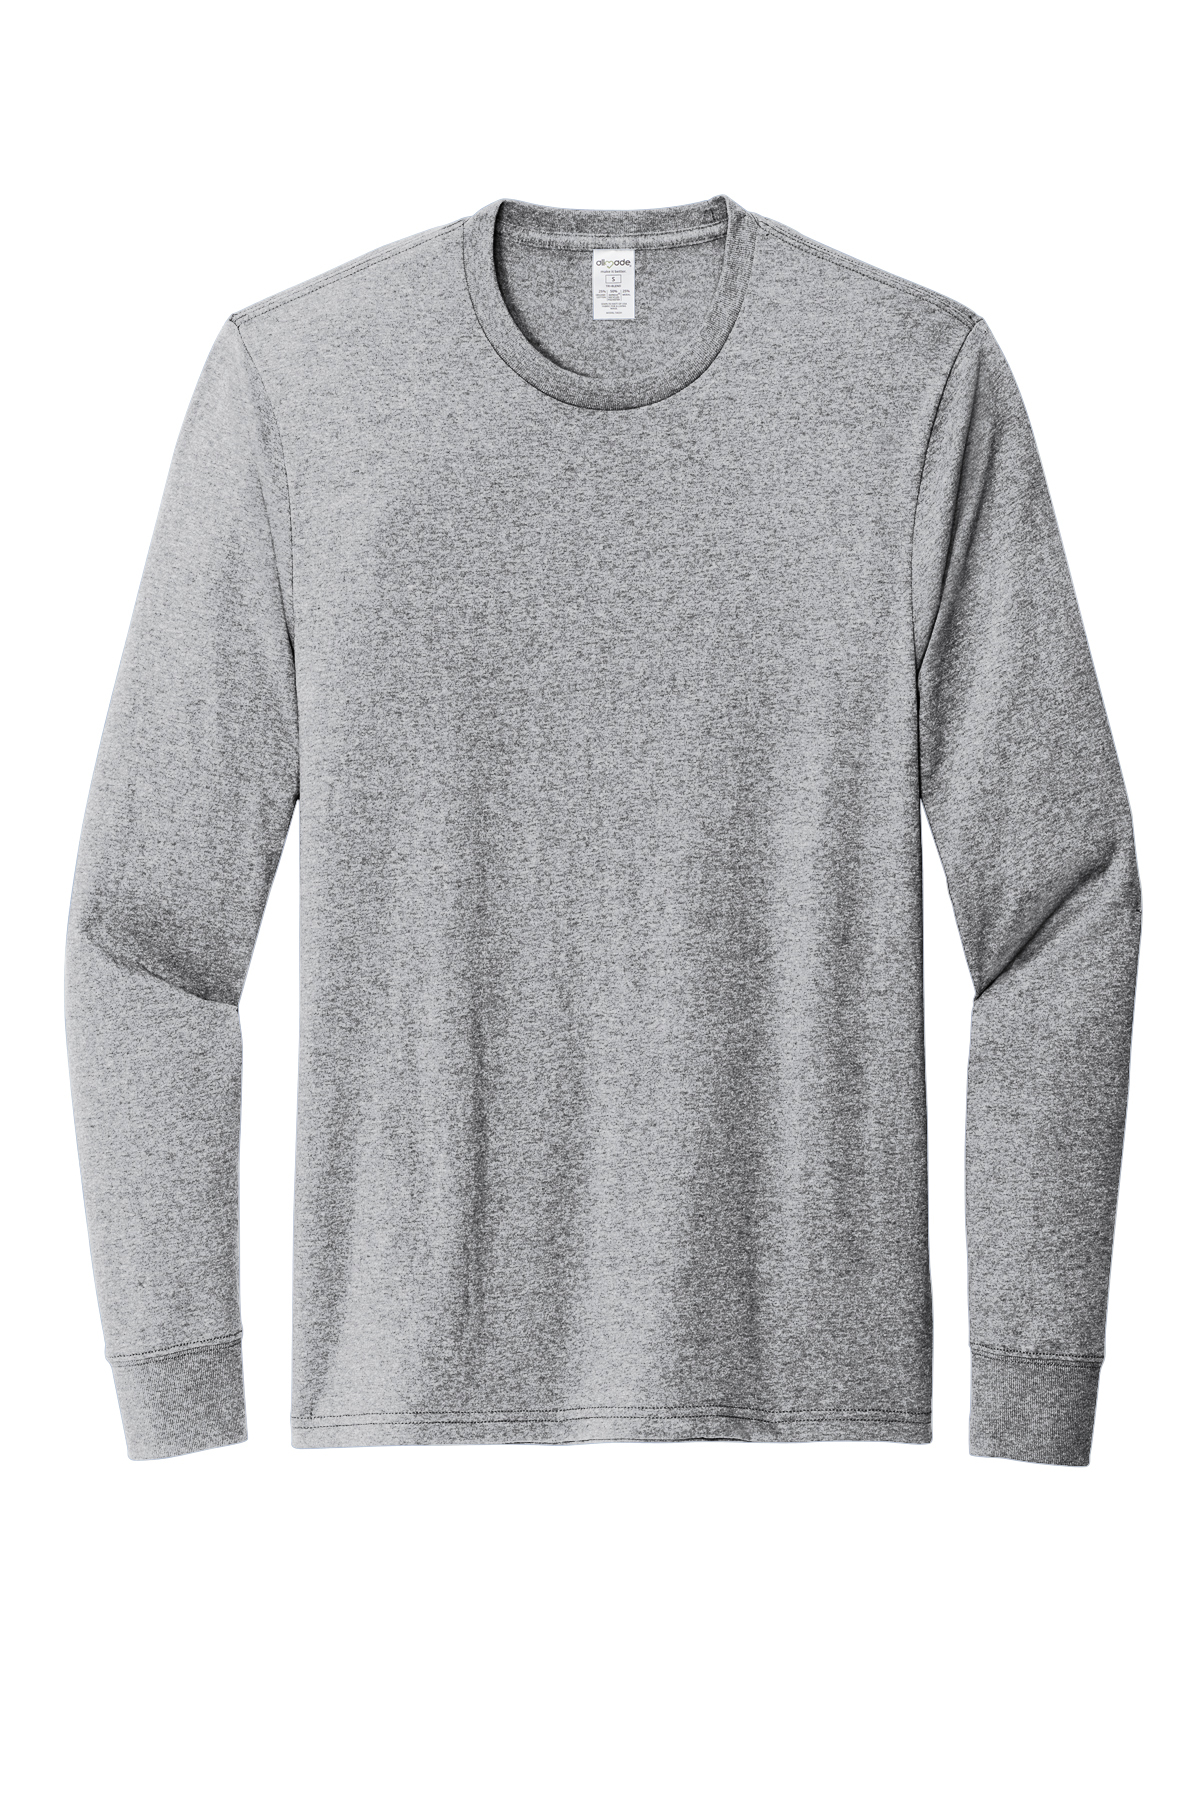 Allmade Unisex Long Sleeve Recycled Blend Tee | Product | SanMar